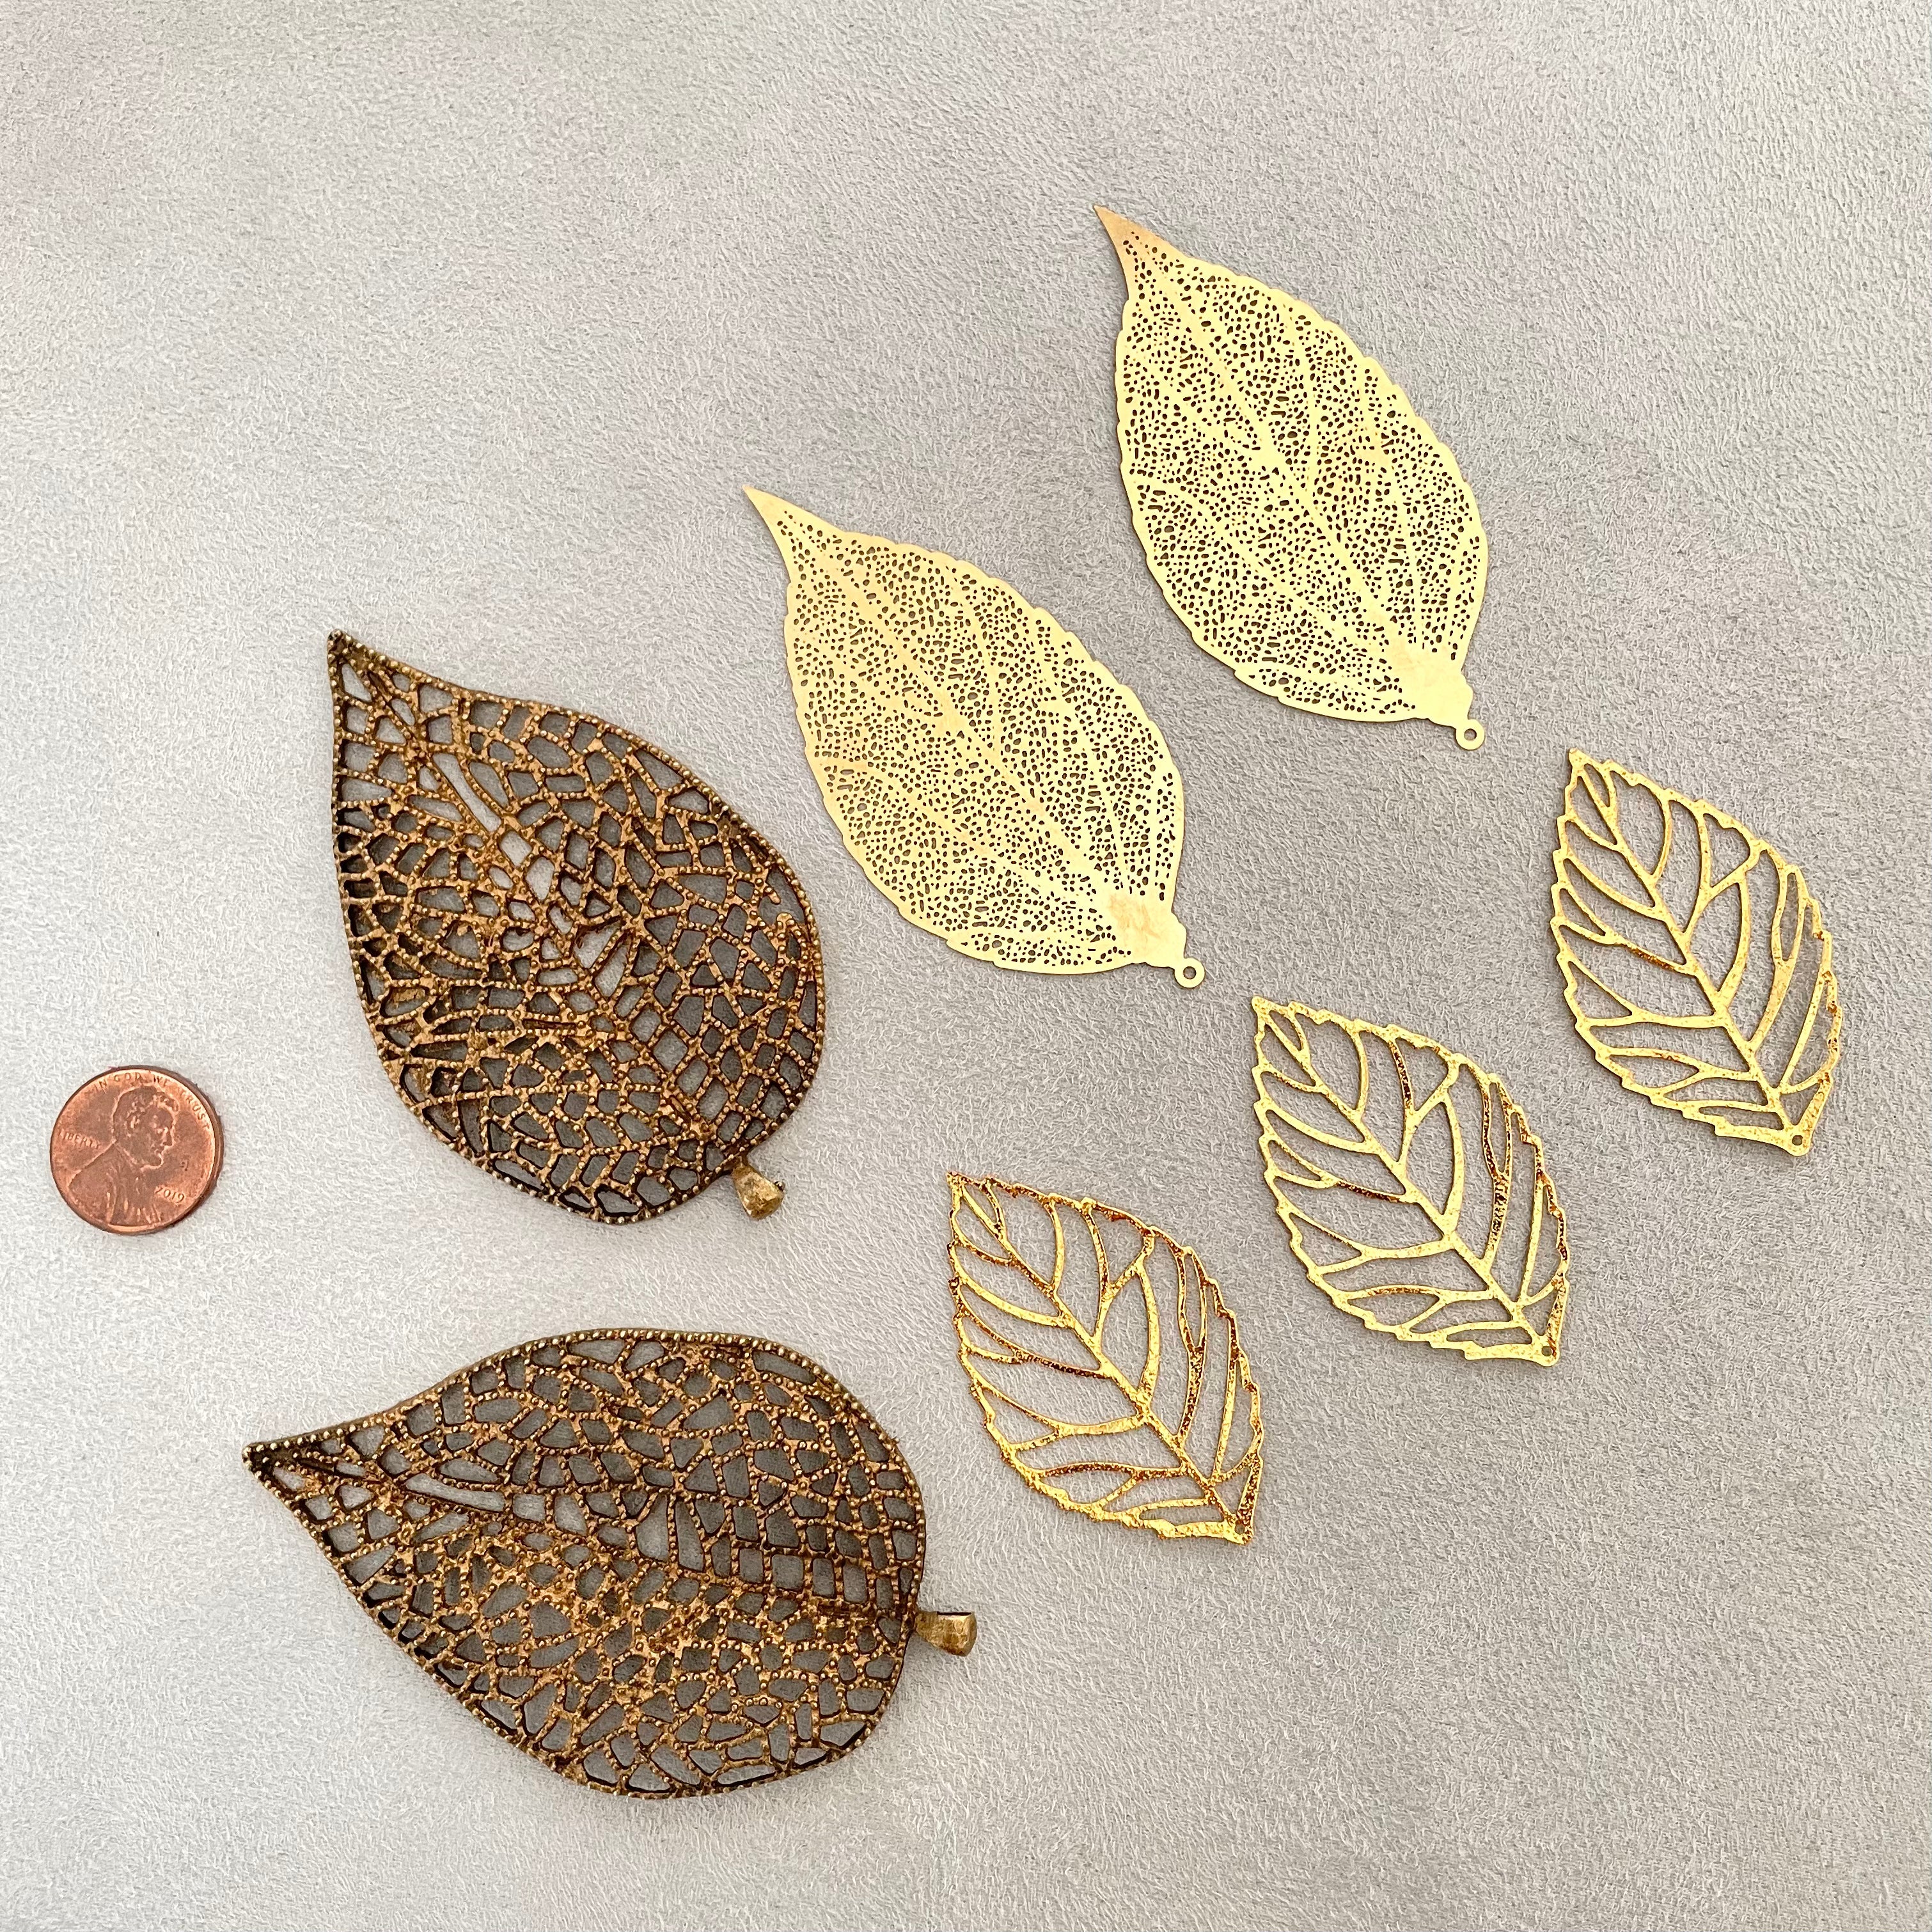 7 styling leaves including 3 gold leaves, 2 gold leaves that are larger and 2 large coco bronze leaves, penny beside for size reference  - flat lay props from Champagne & GRIT